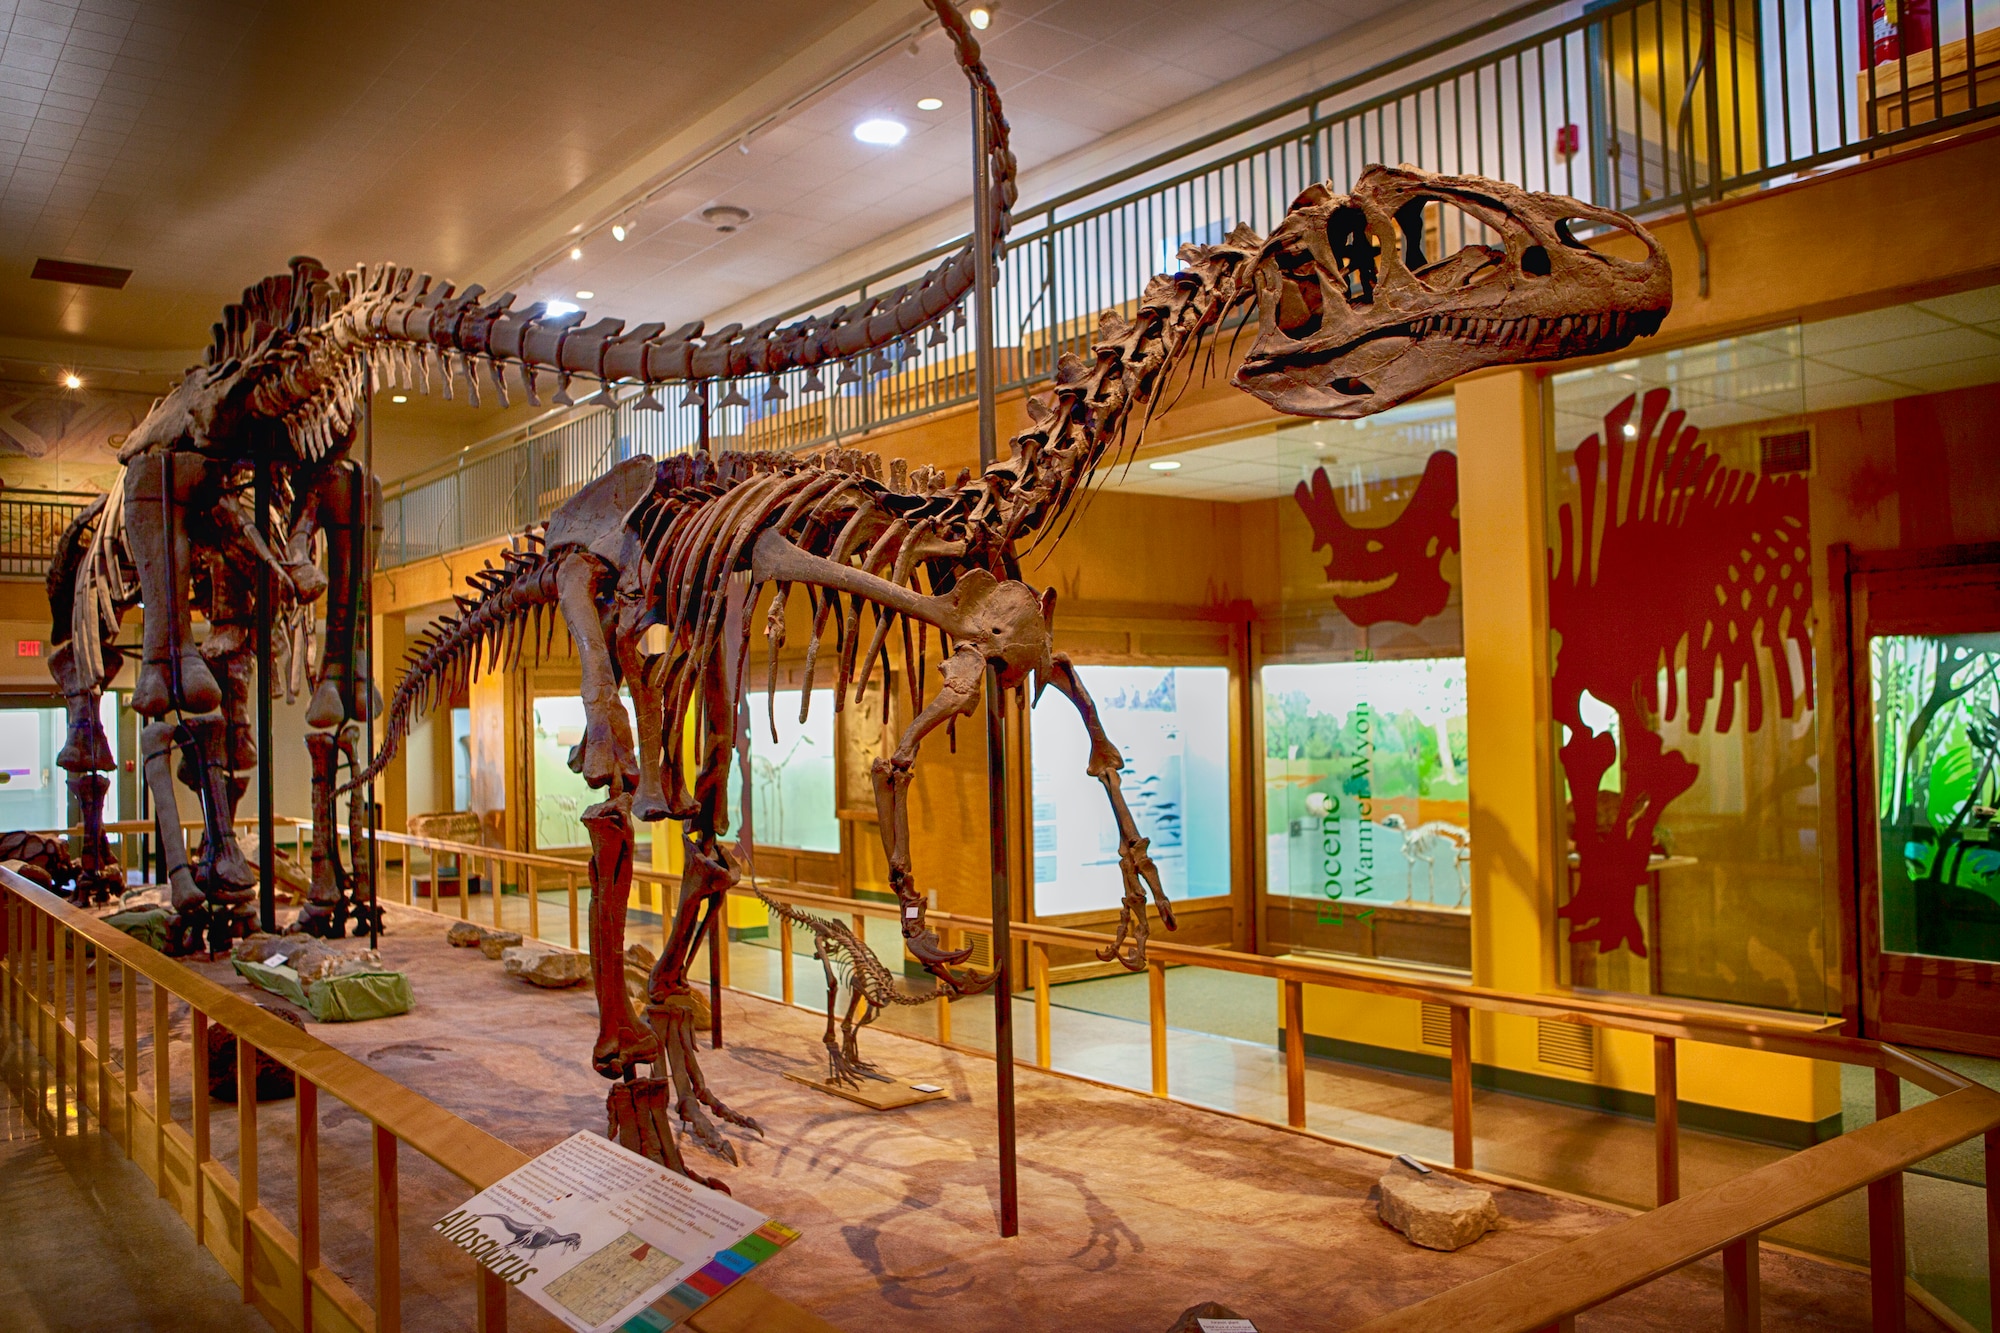 An Allosaurus strikes a pose at the University of Wyoming Natural Geological Museum in Laramie, Wyo.
Allosaurus is a genus of large theropod dinosaur that lived 155 to 150 million years ago during the late Jurassic period. The name "Allosaurus" means "different lizard." (U.S. Air Force photo by Matt Bilden)